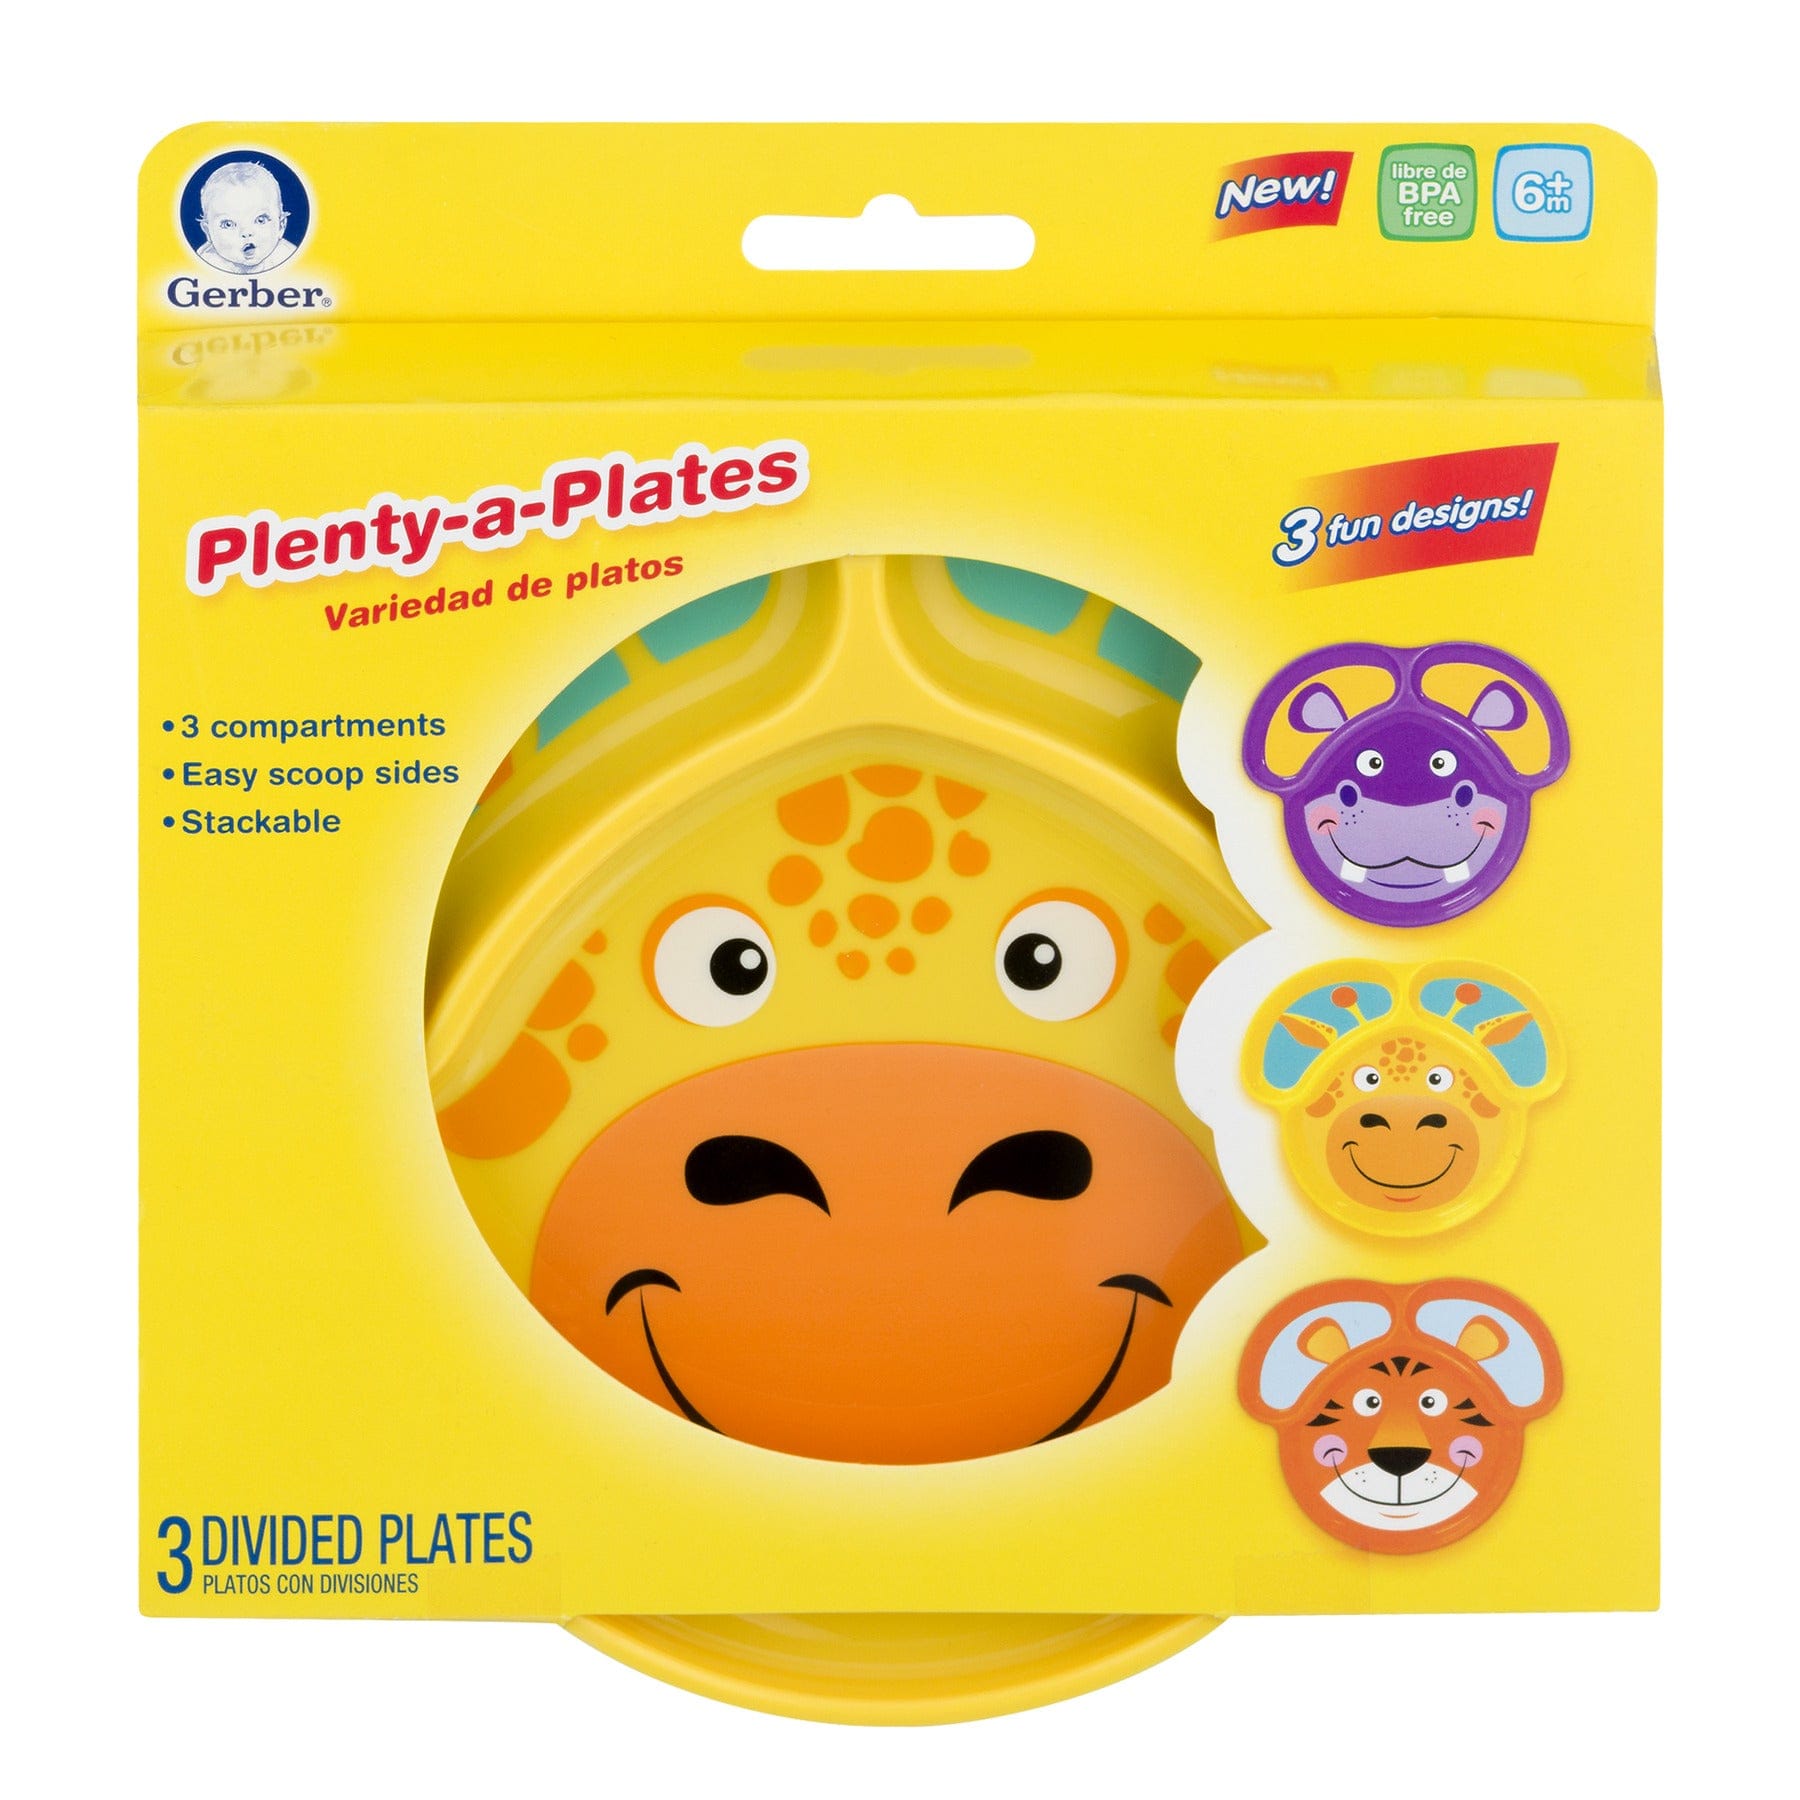 Gerber Plenty A Plate 3pk: 3 compartments and easy scoop sides - 17253MS